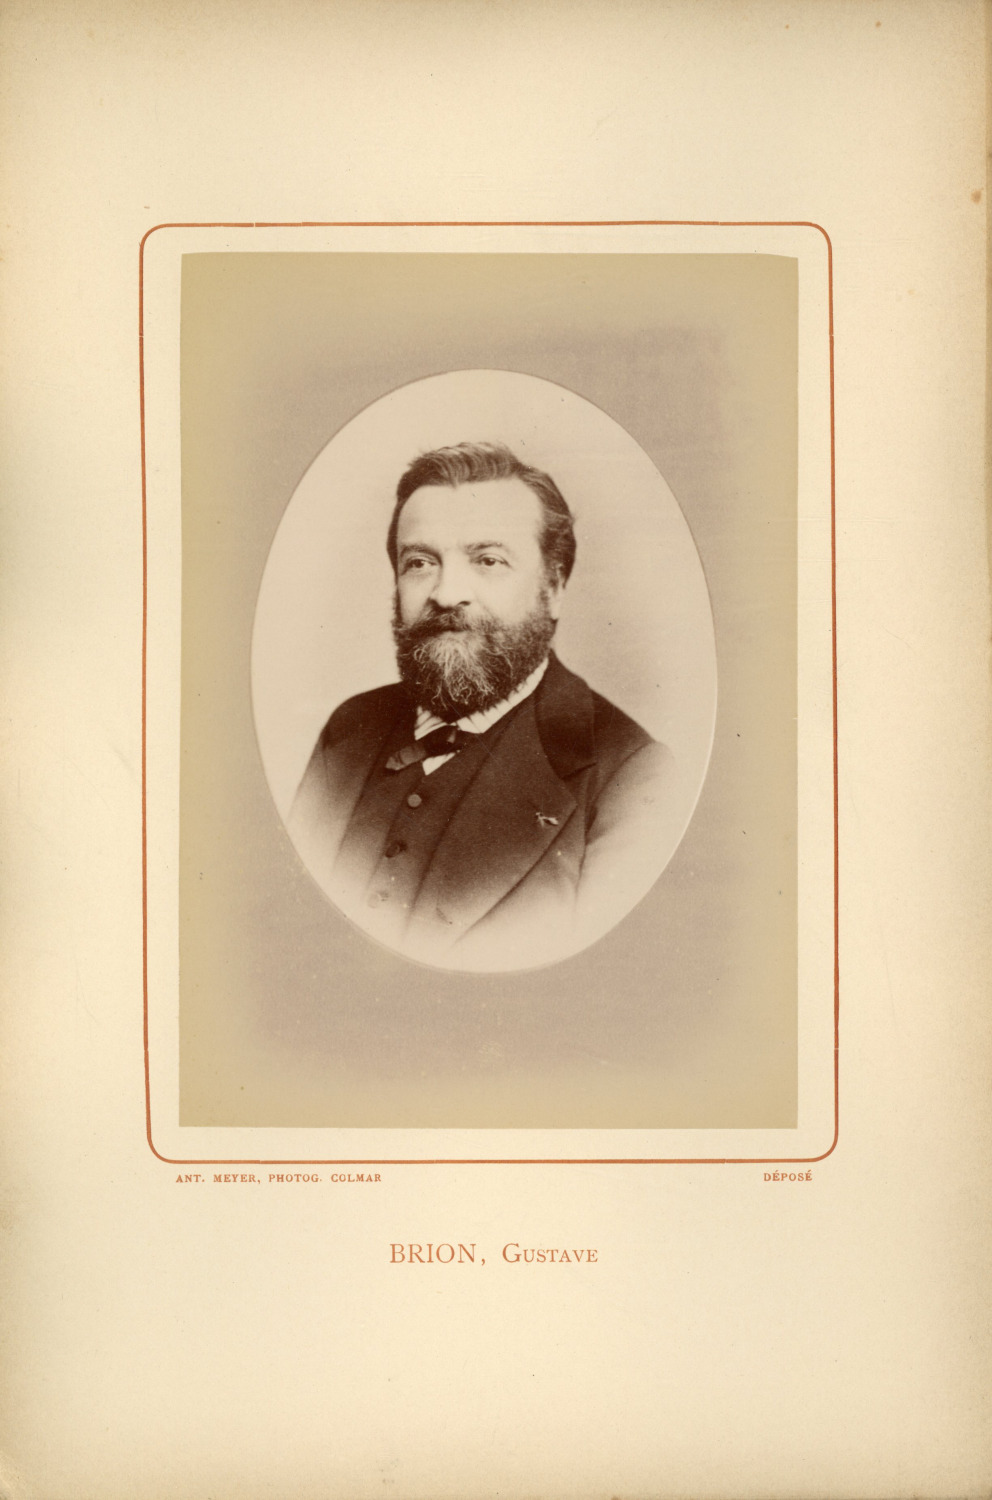 Ant. Meyer, Photog. Colmar, Gustave Adolphe Brion (1824-1877), painter and illustrious